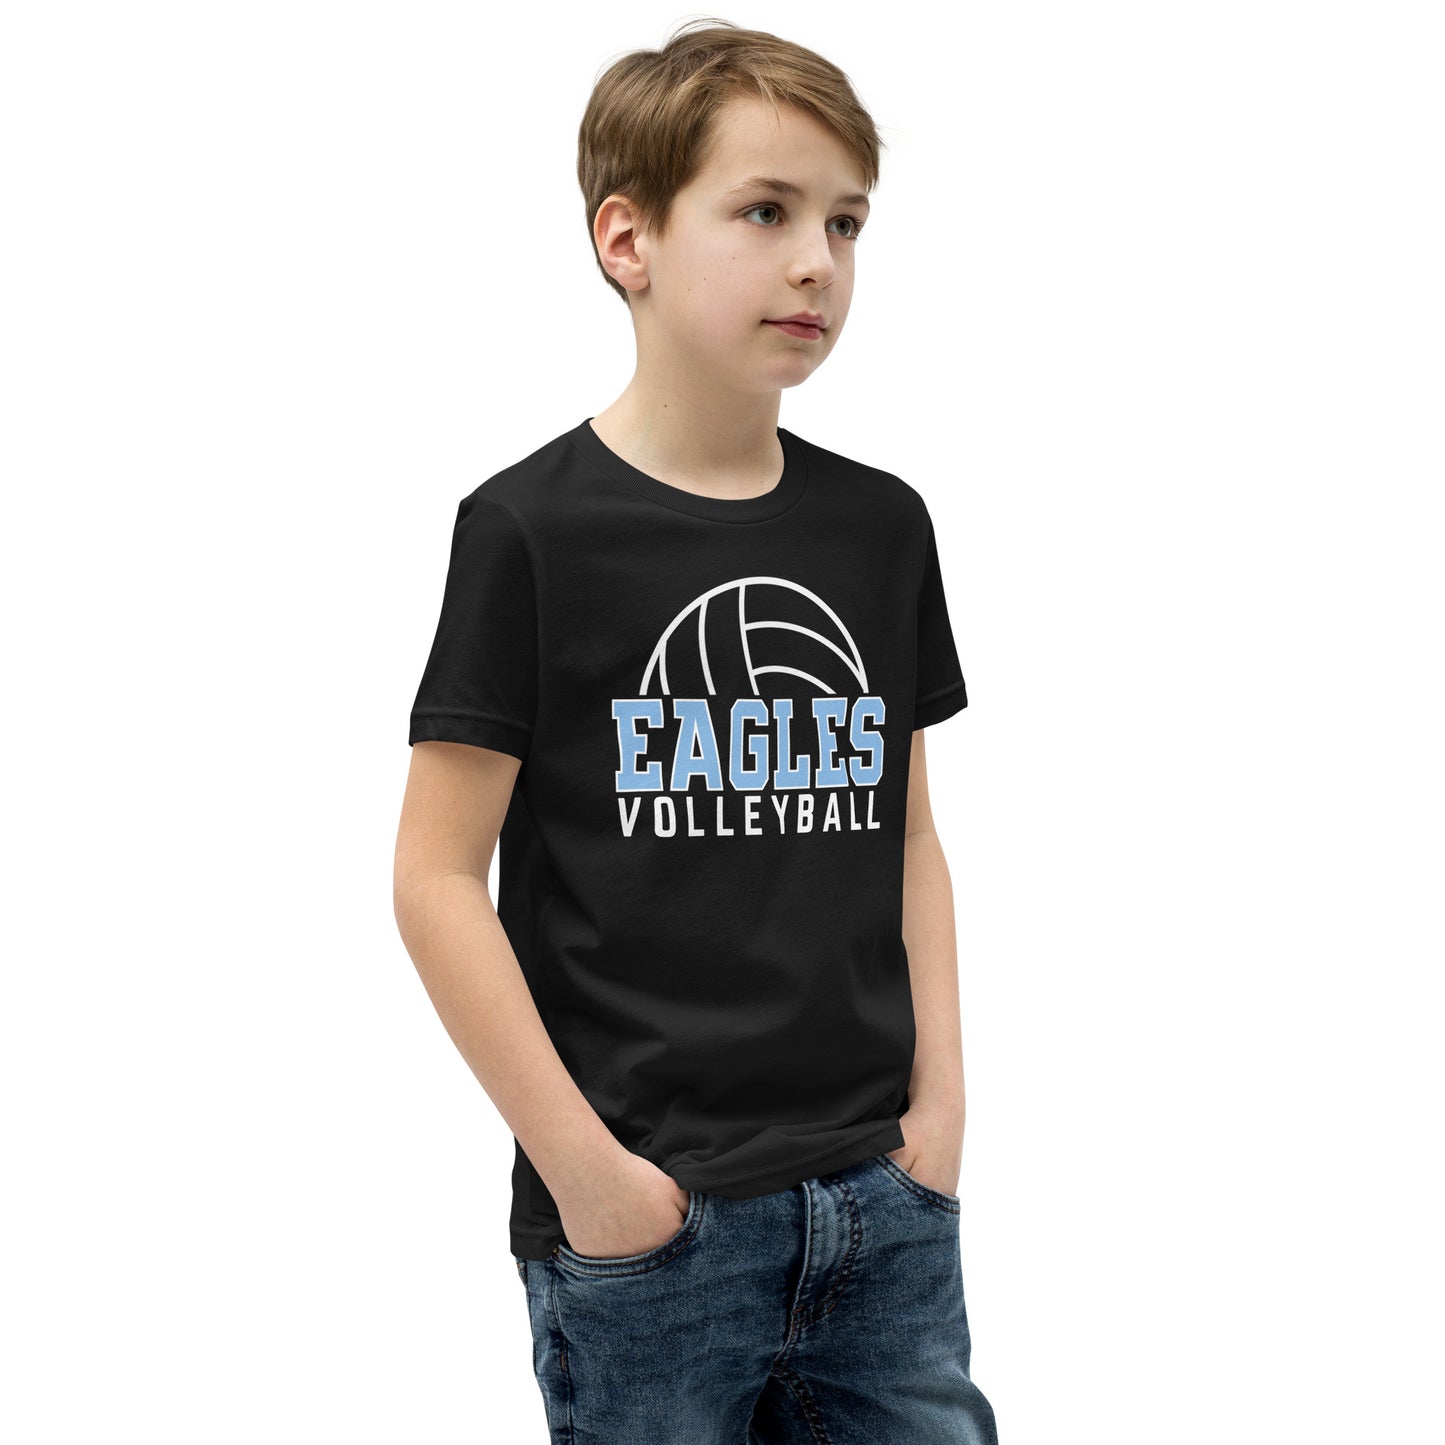 Volleyball Customizable Youth T-Shirt